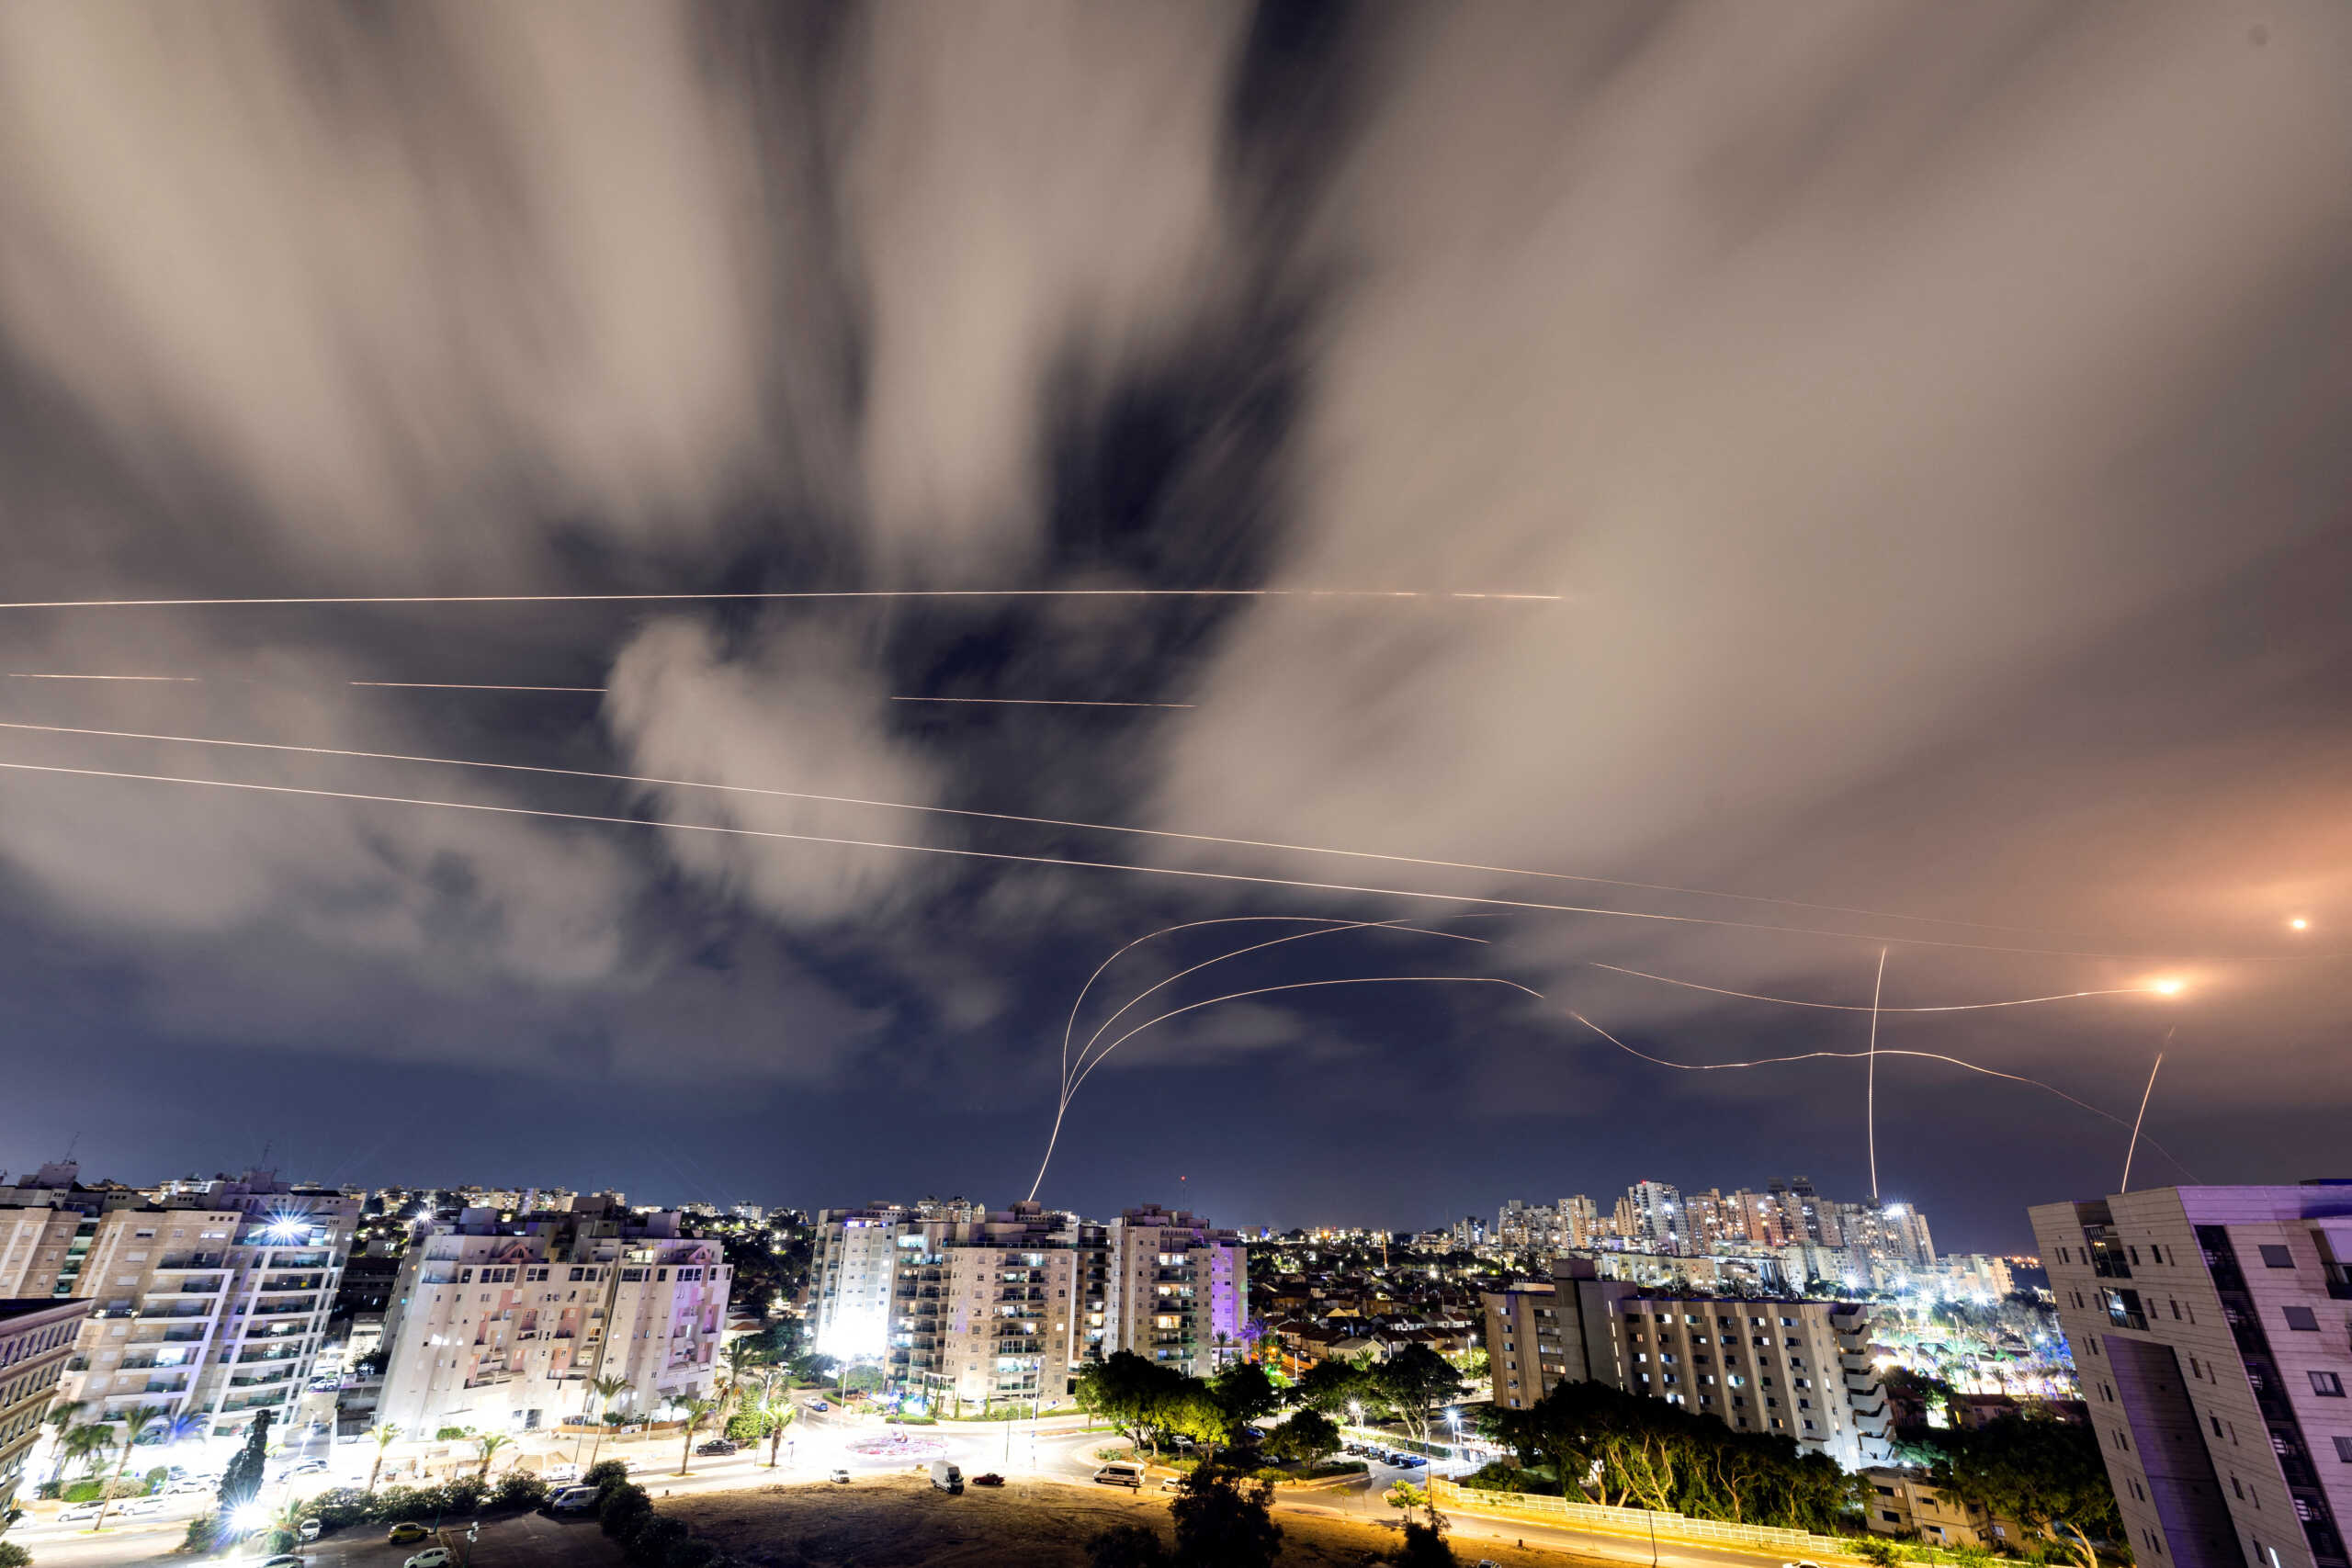 A major missile attack on Tel Aviv by Hamas